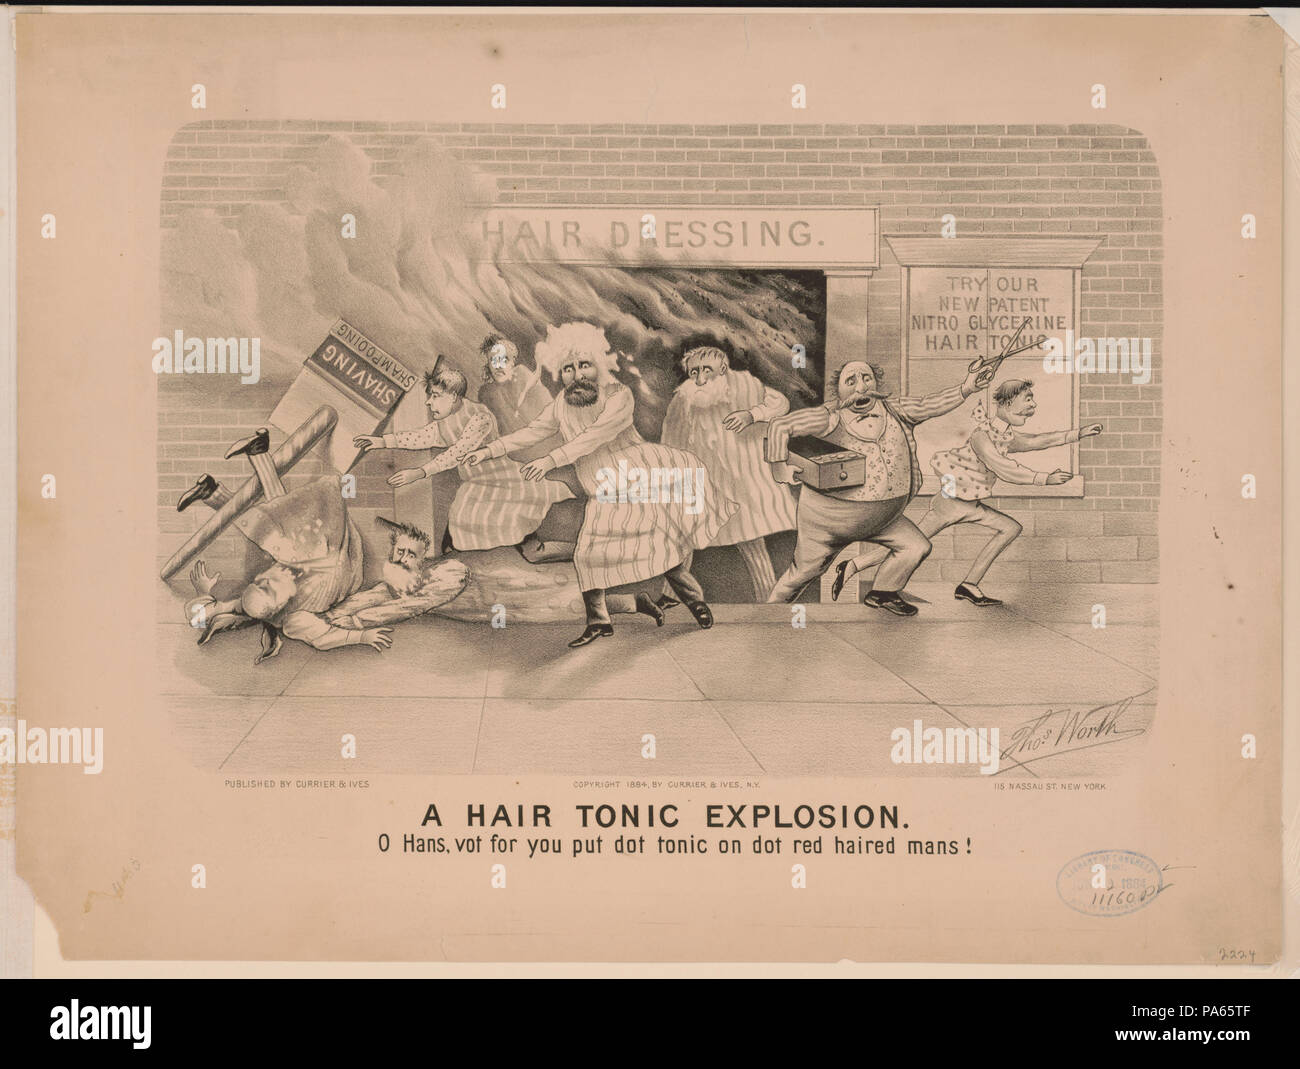 81 A hair tonic explosion- o Hans, vot for you put dot tonic on dot red haired mans! LCCN2002695822 Stock Photo